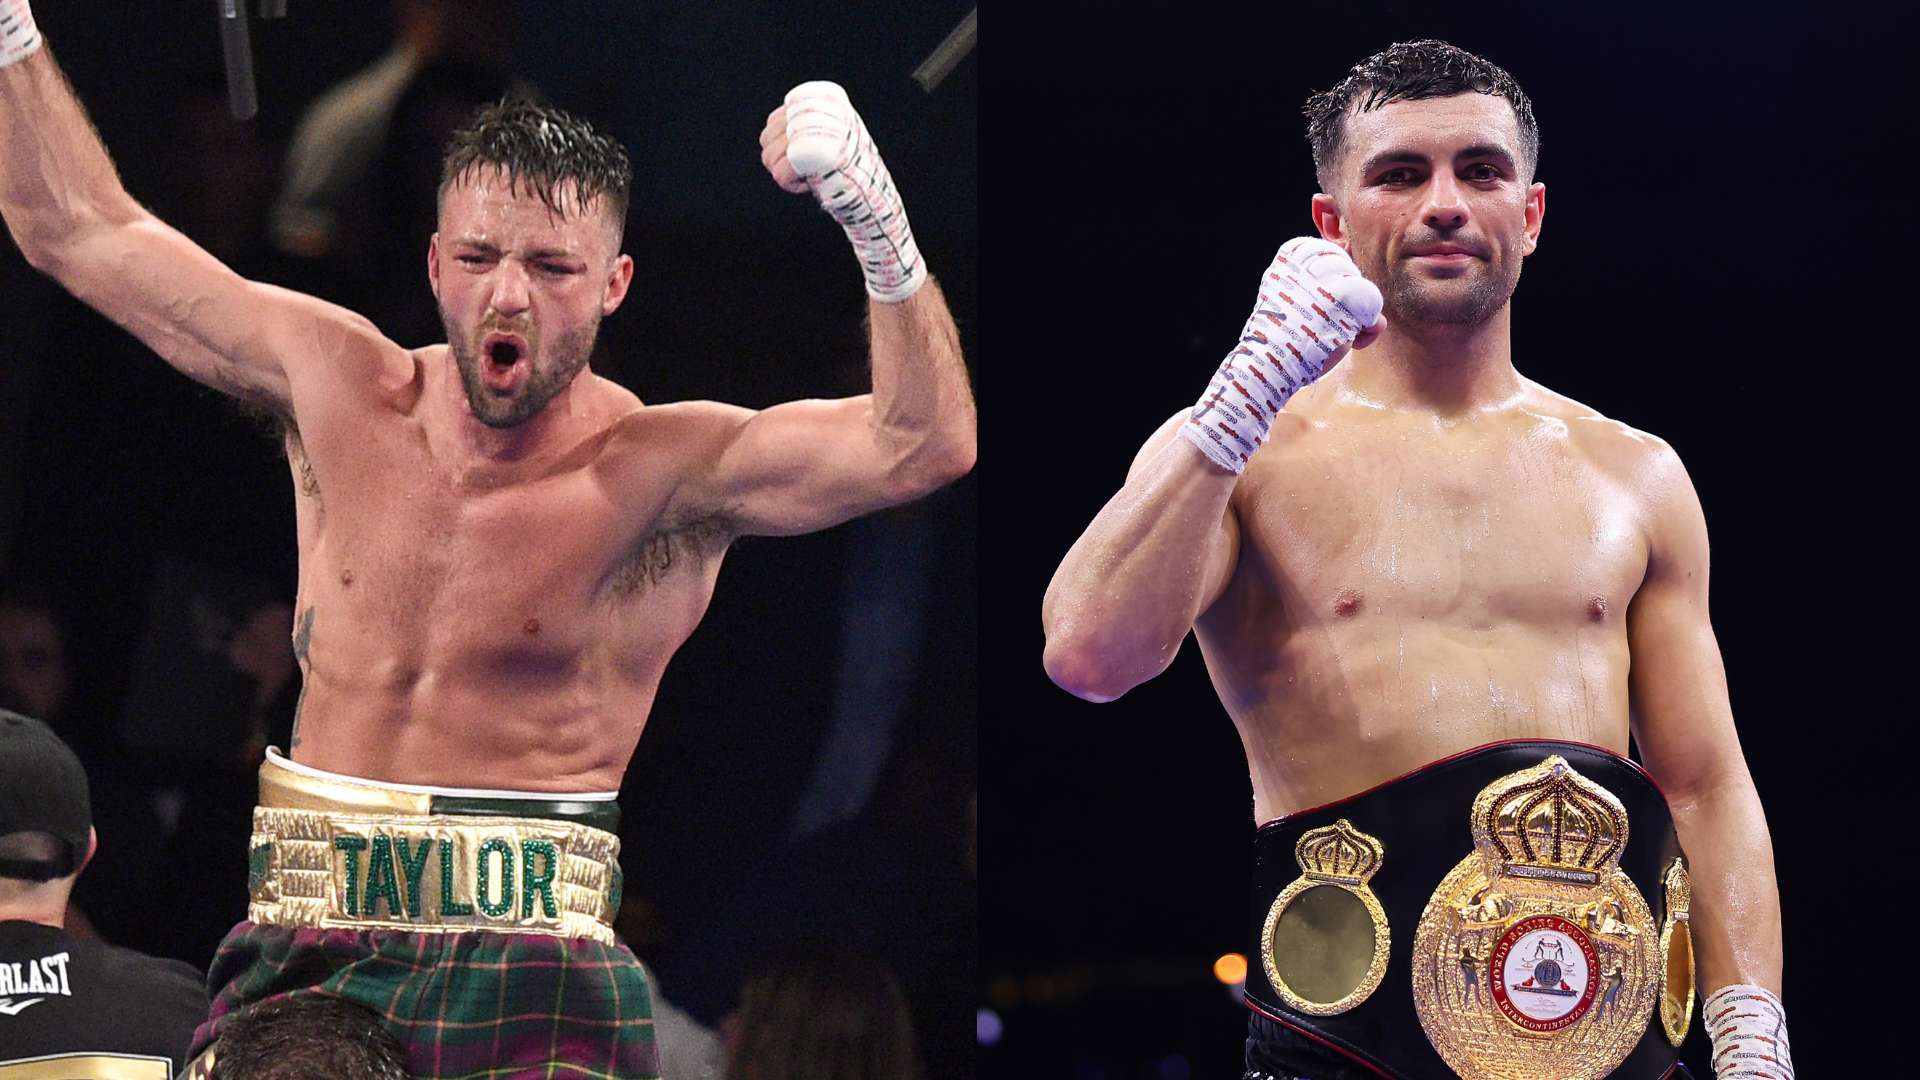 Taylor vs Catterall re-match boxing